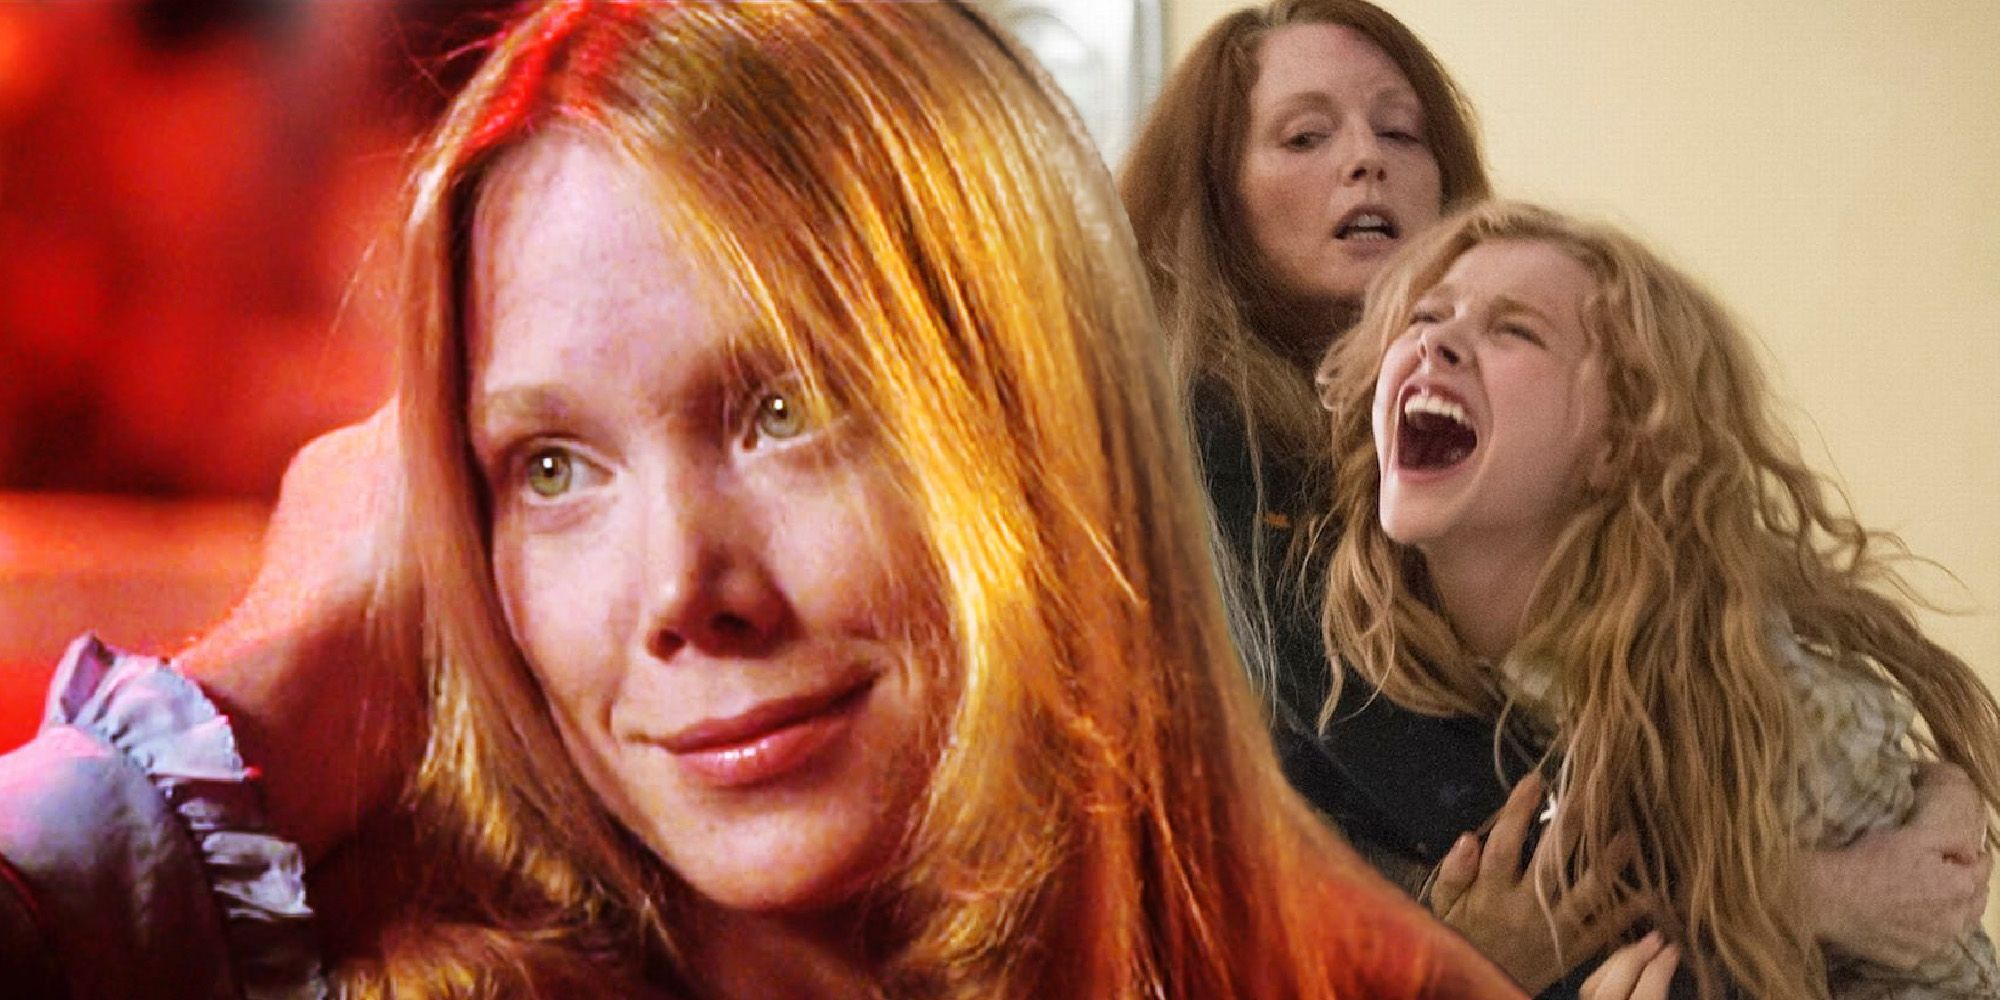 Carrie: The Real Women Who Inspired The Stephen King Book Character